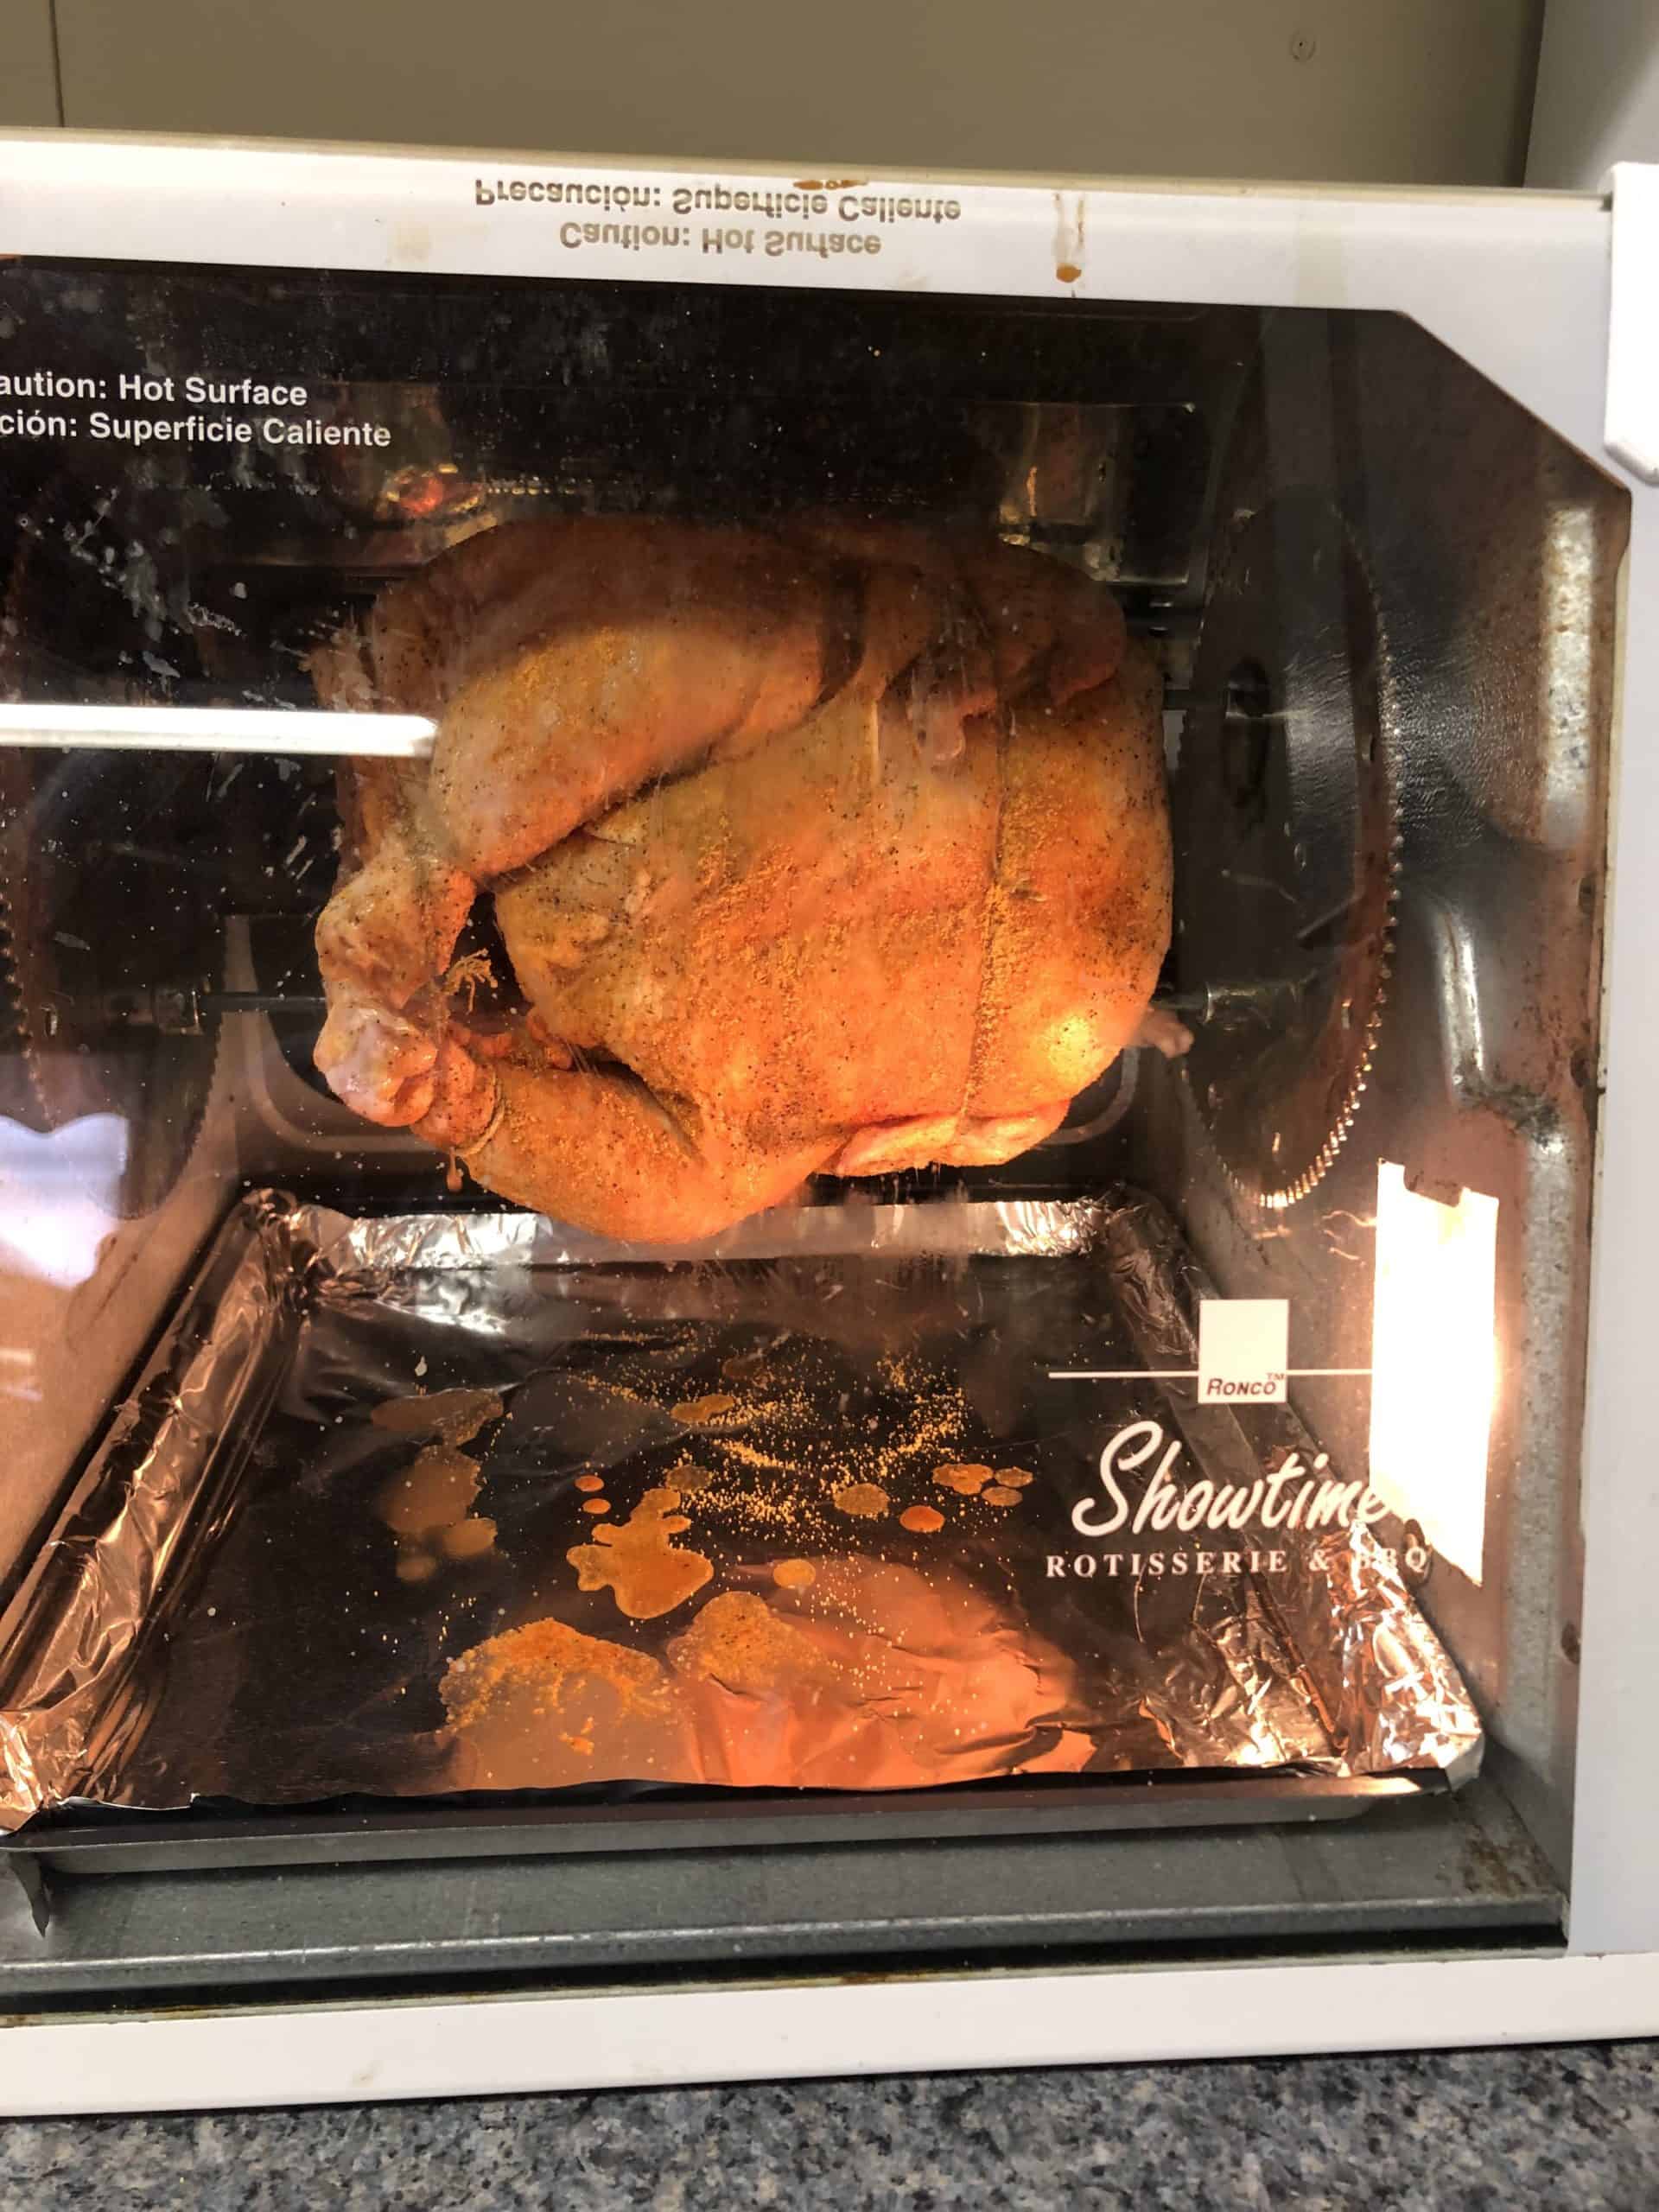 Cooking a Whole Chicken in a Ronco Rotisserie Oven.